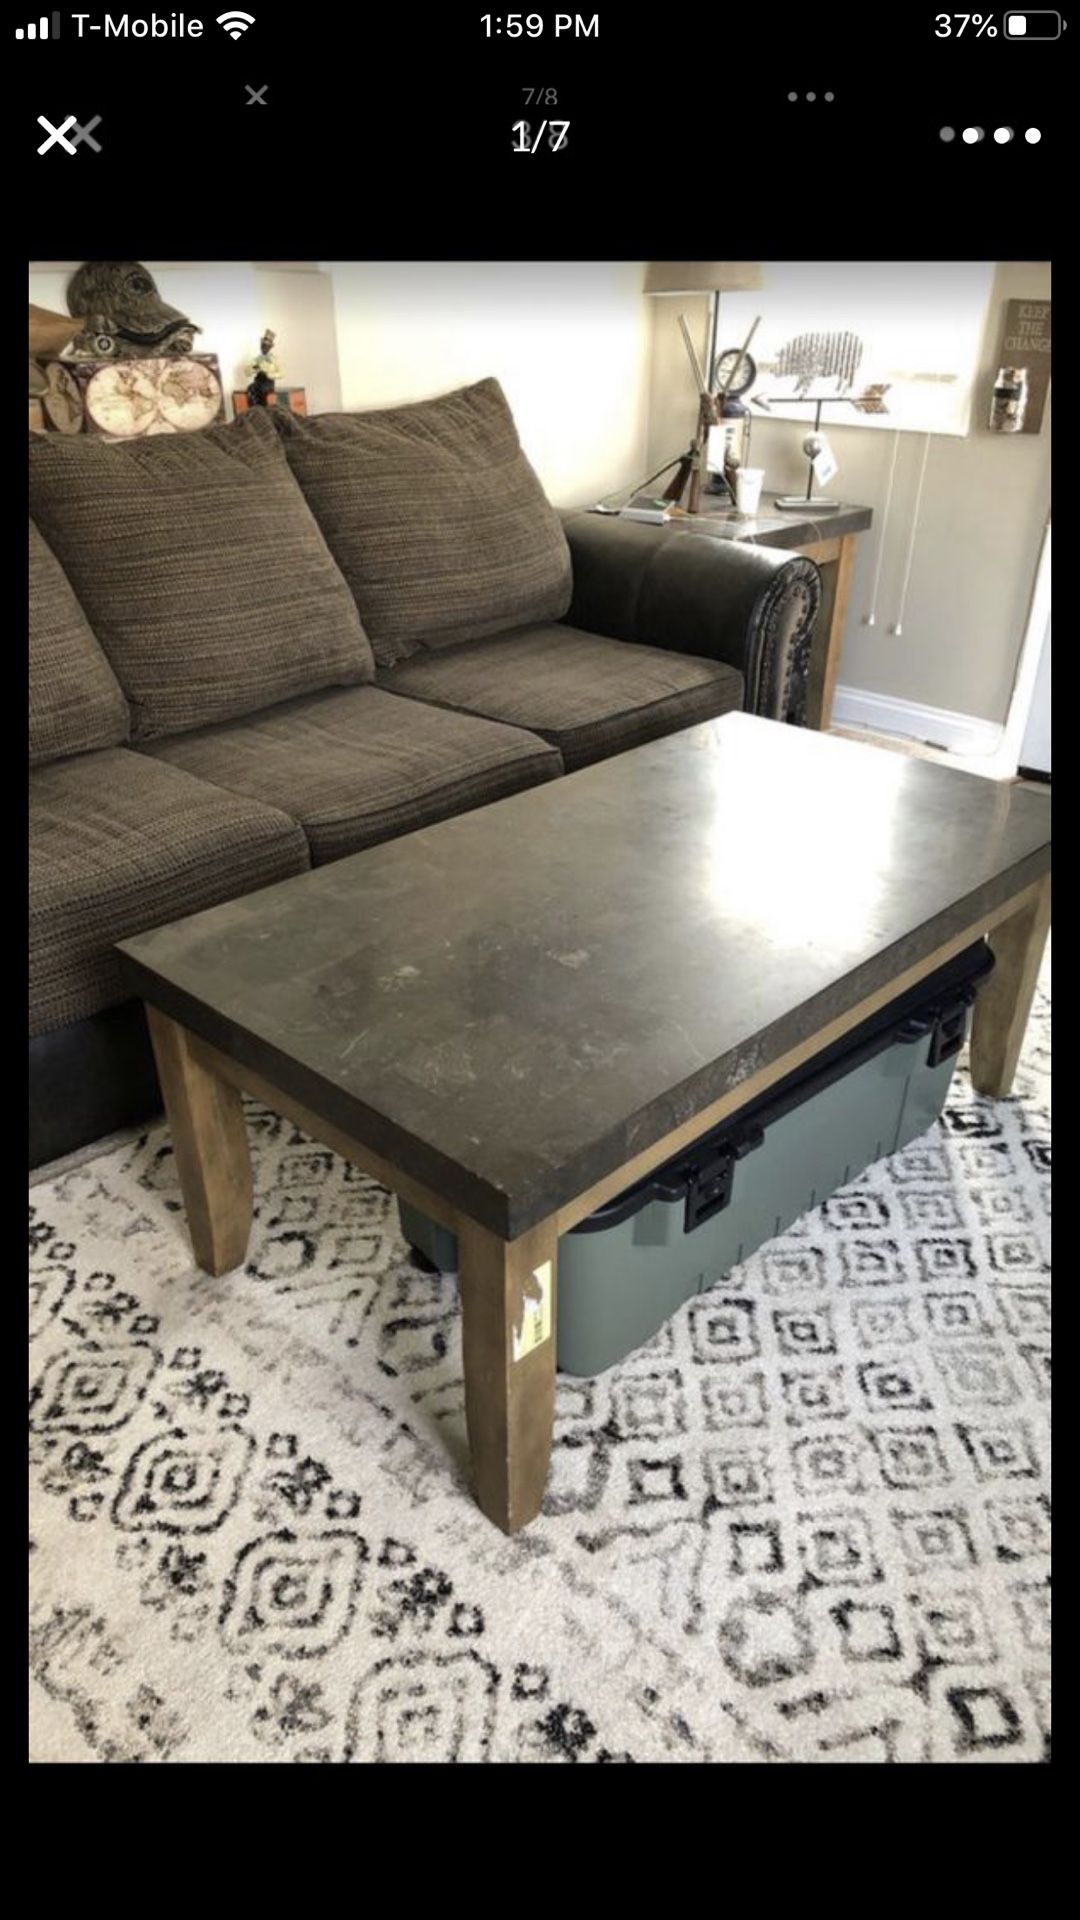 Sofa and Coffee table and 1 end table